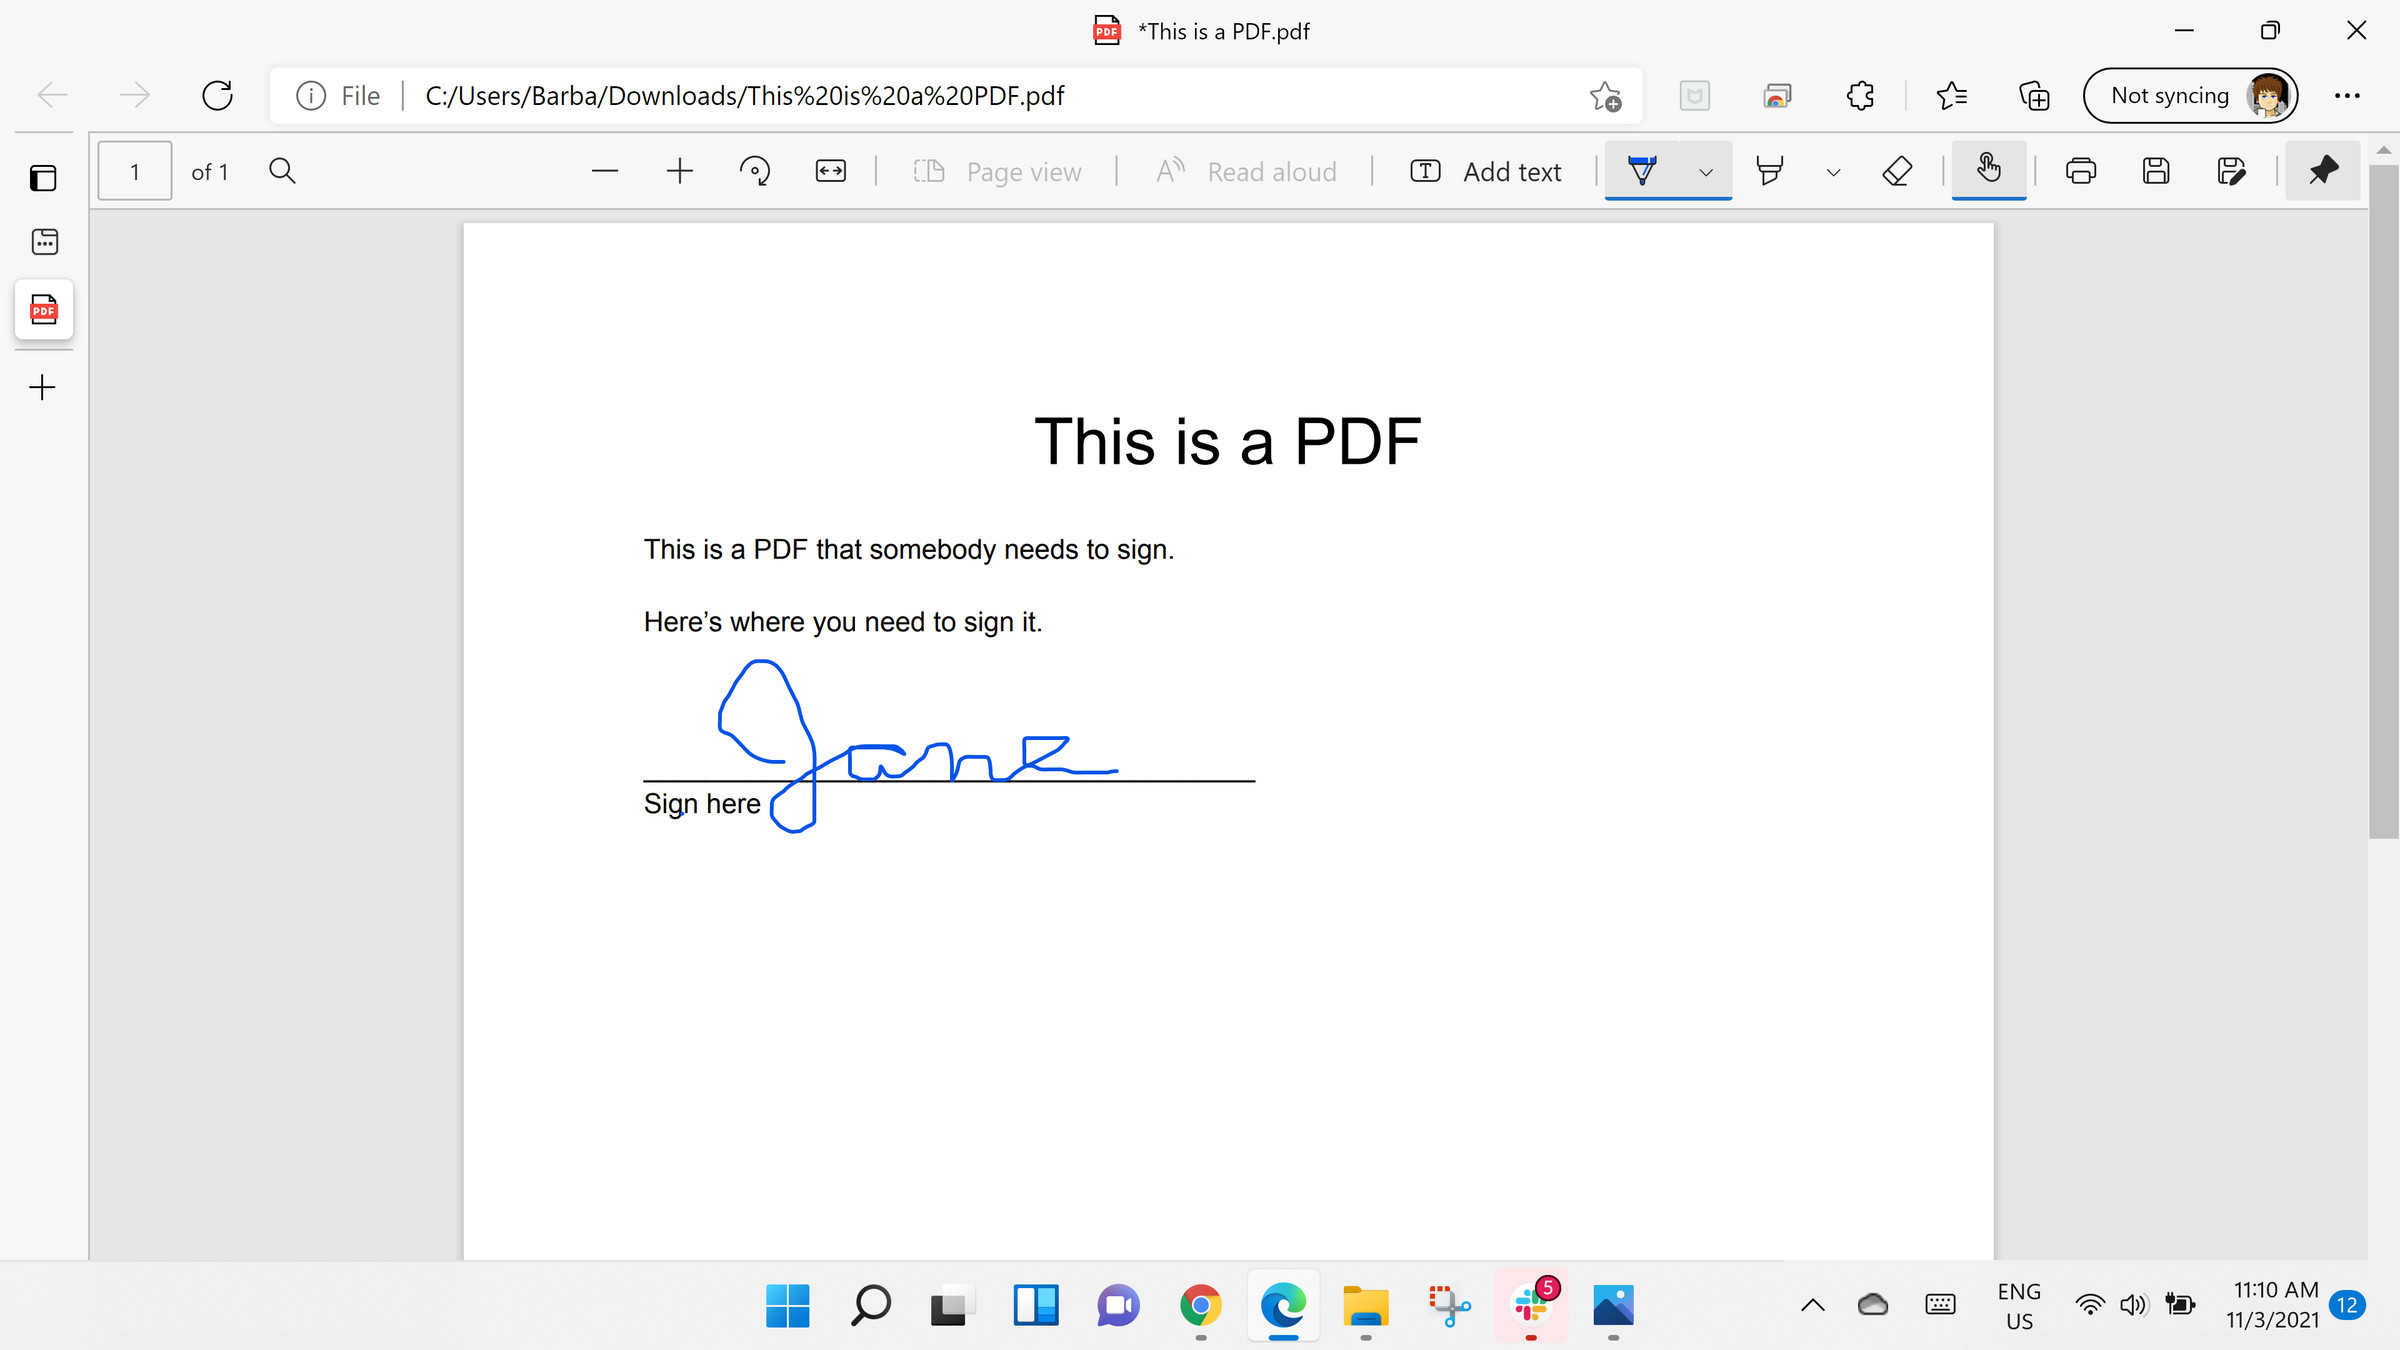 You can sign a PDF in Edge, but you can’t save your signature.